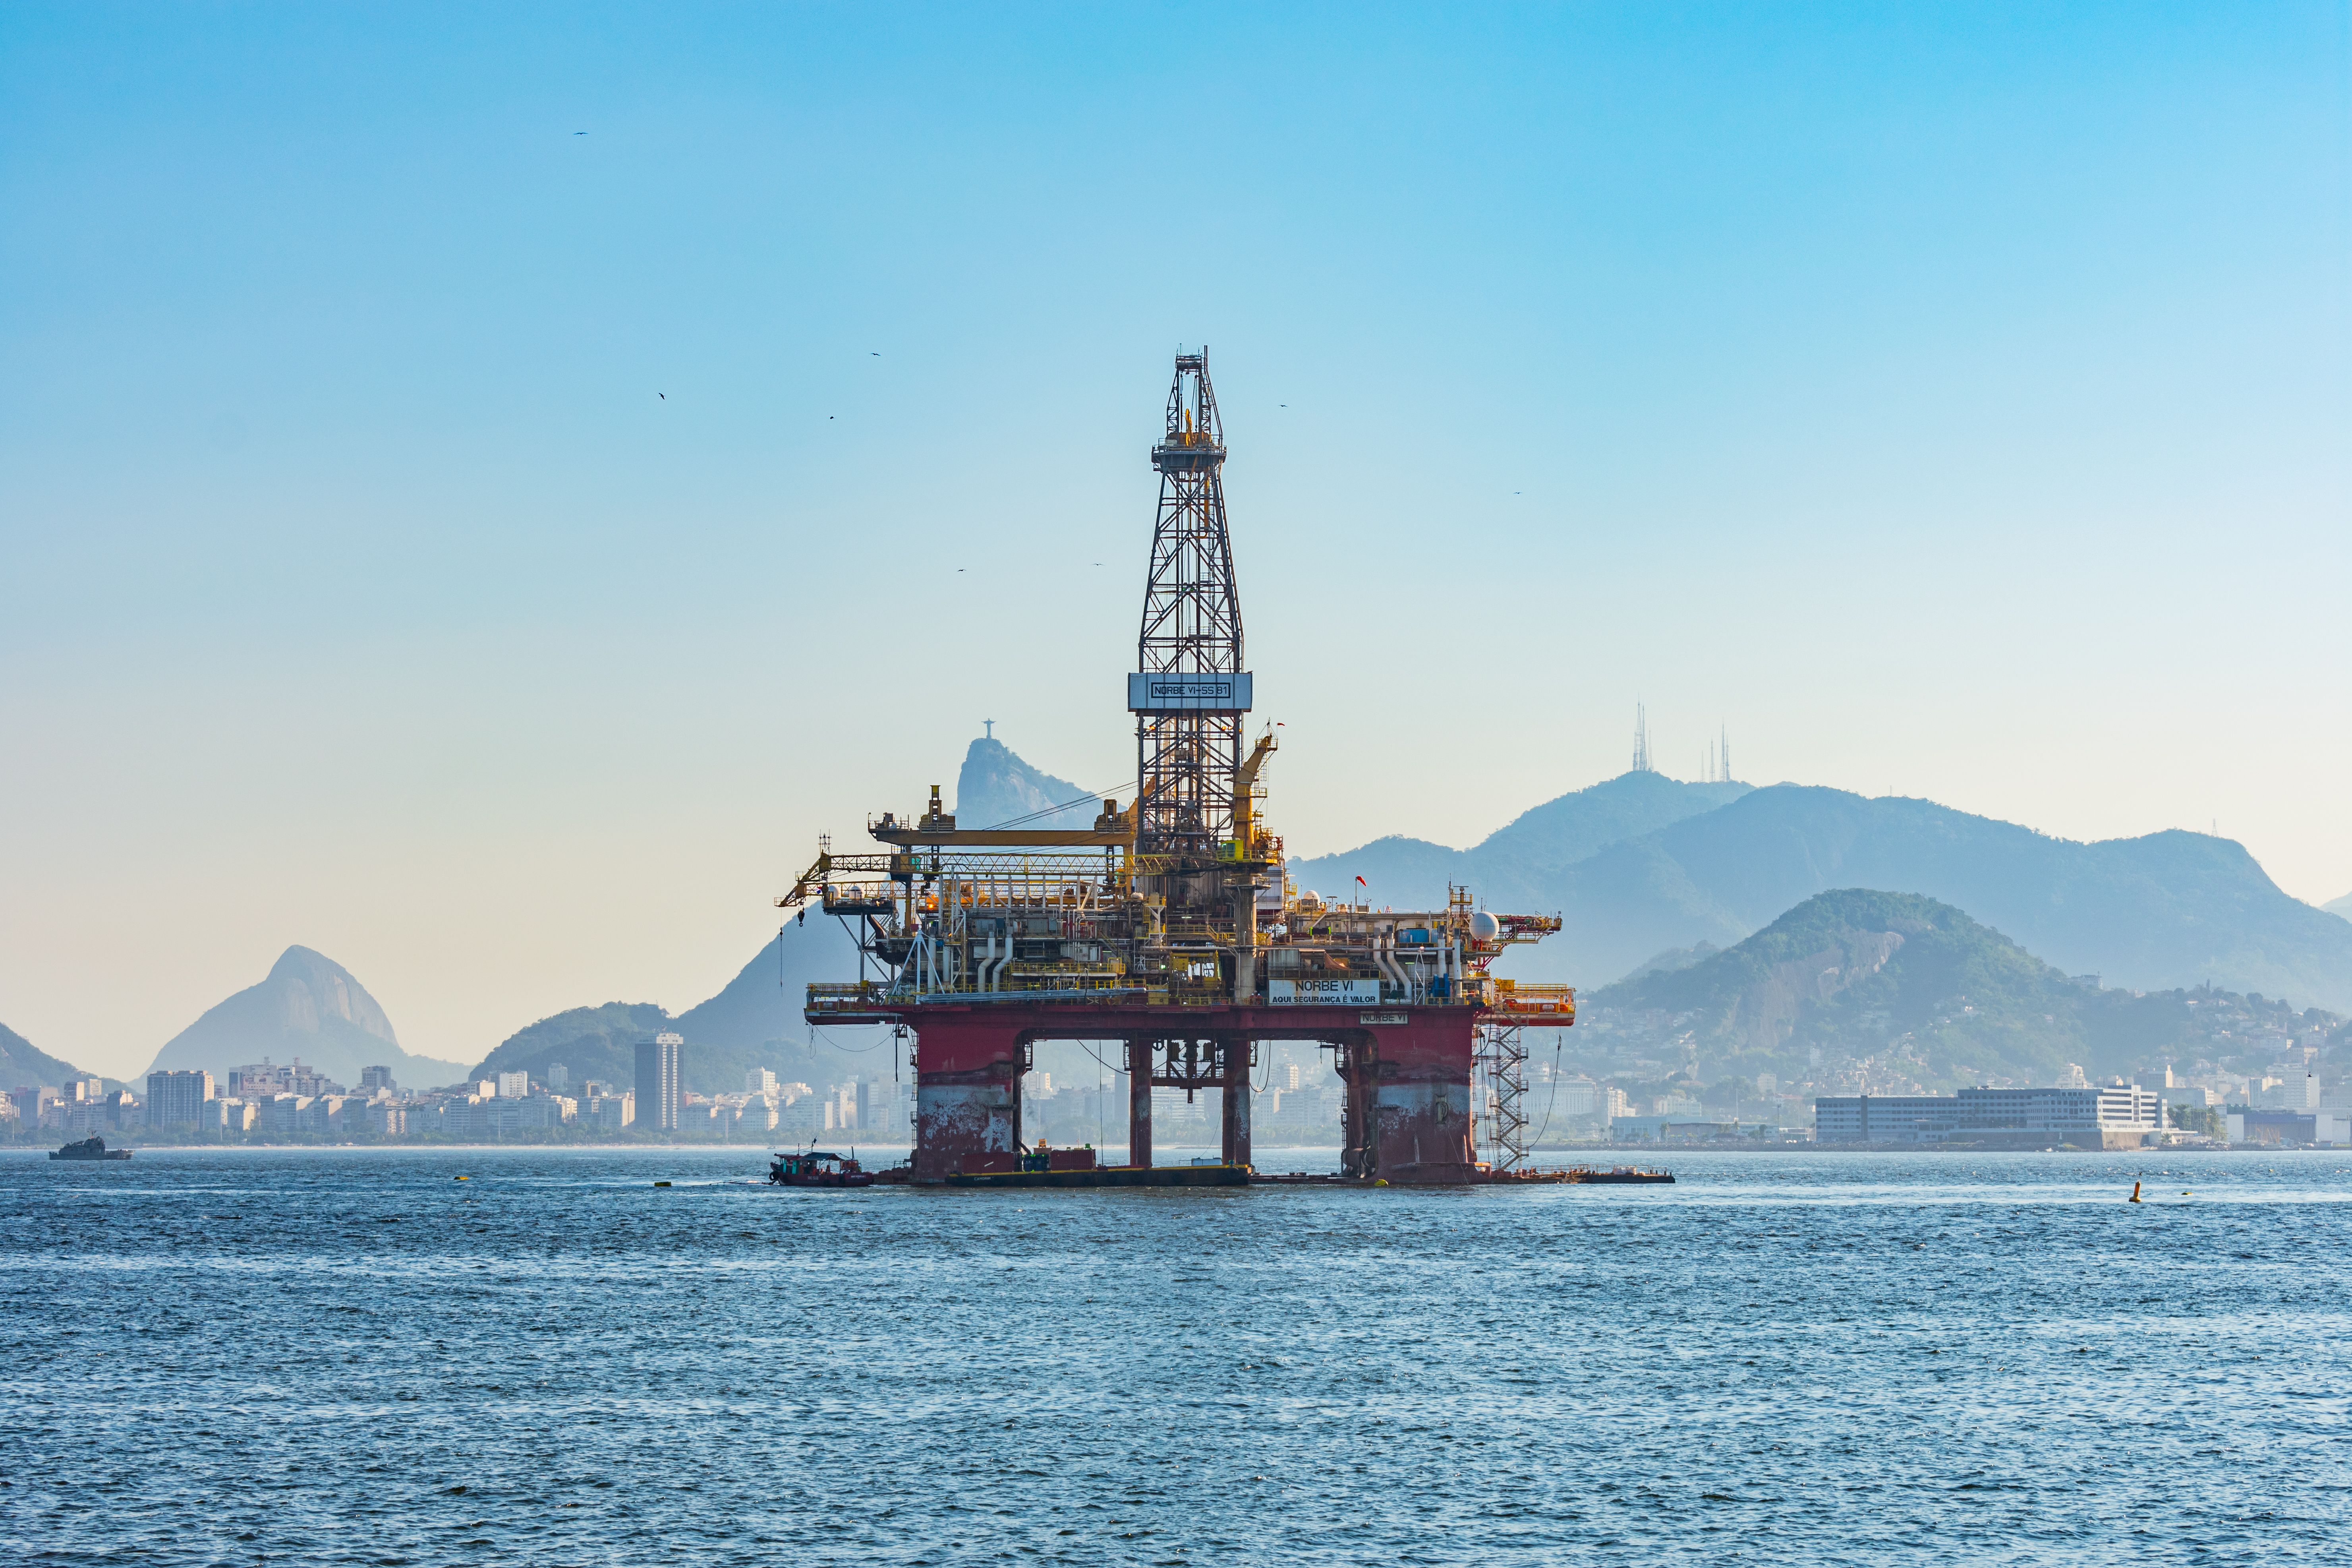 An oil exploration platform in the middle of a water body with Rio de Janeiro in the background.